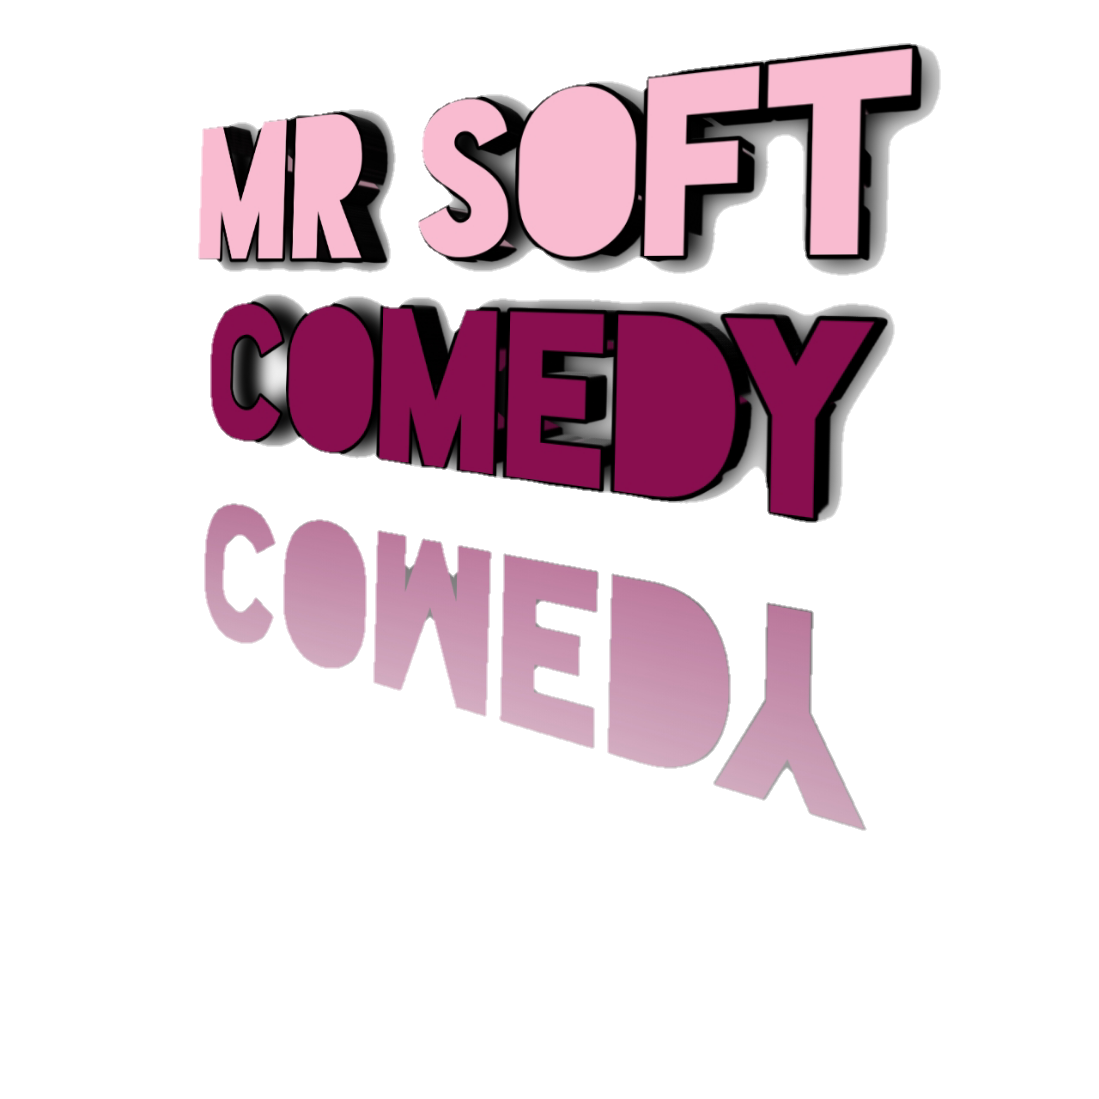 mr.soft.comedy Post free event in Nigeria using tickethub.ng, buy and sell tickets to event